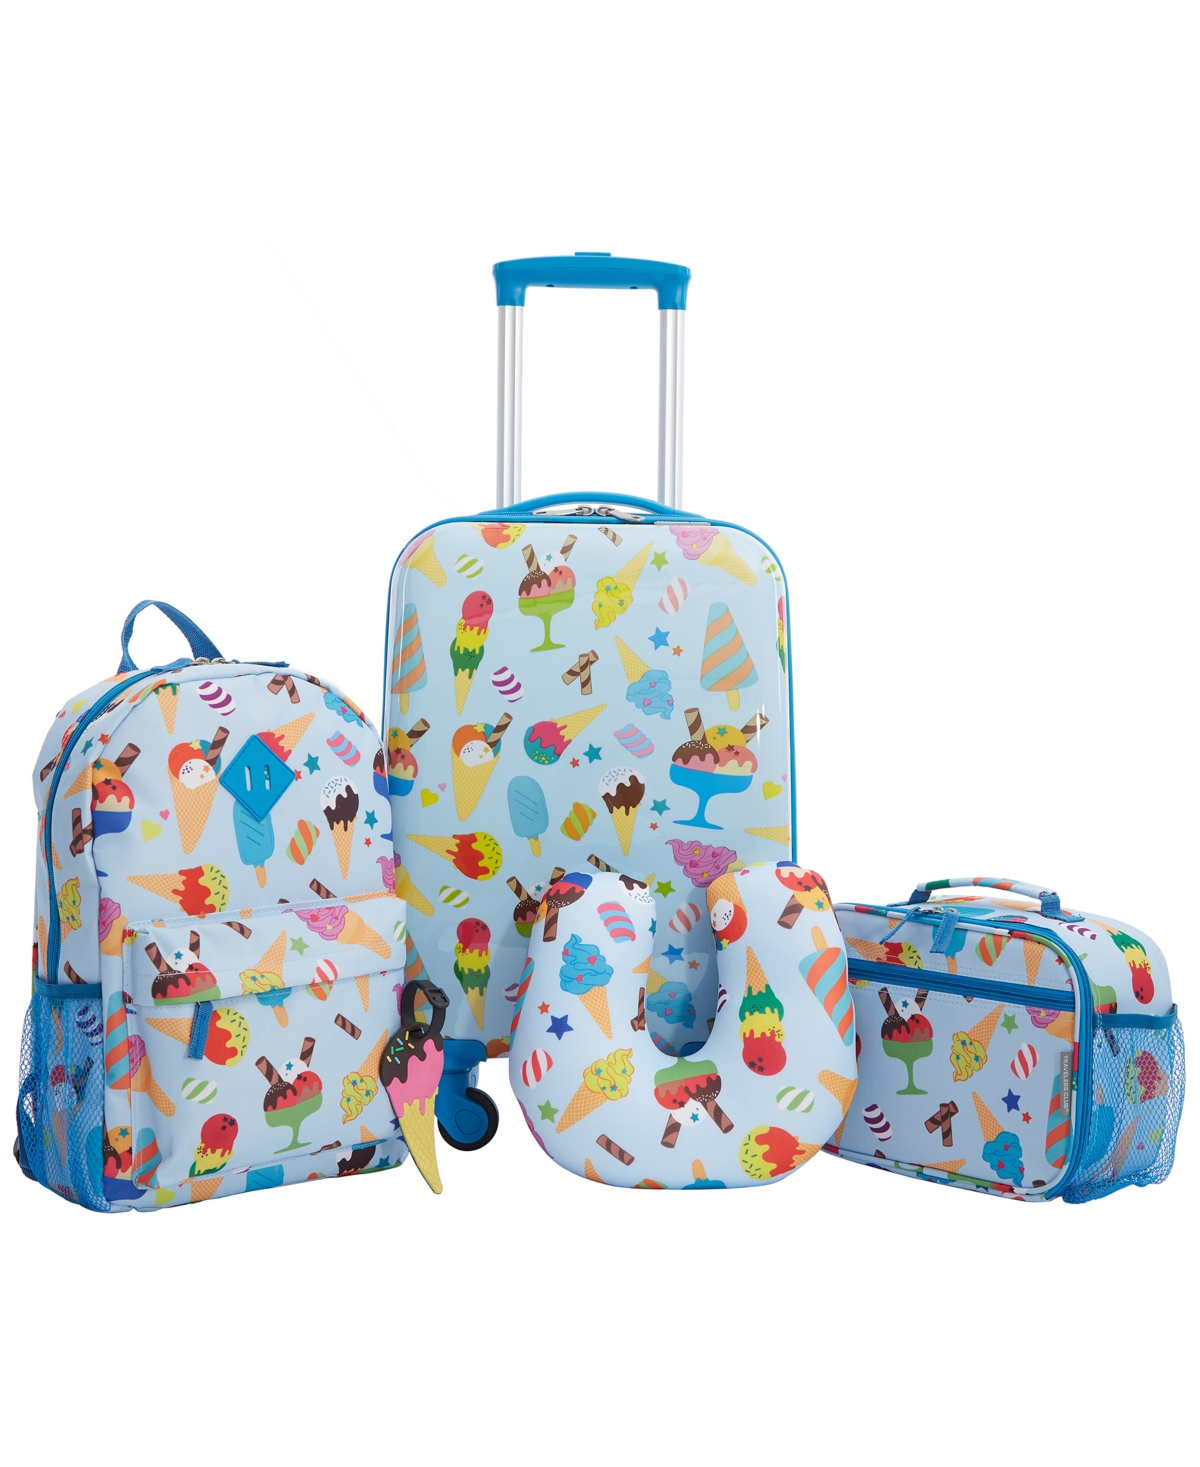 Travelers Club Kid's Hard Side Carry-on Spinner 5 Piece Luggage Set In Icecream